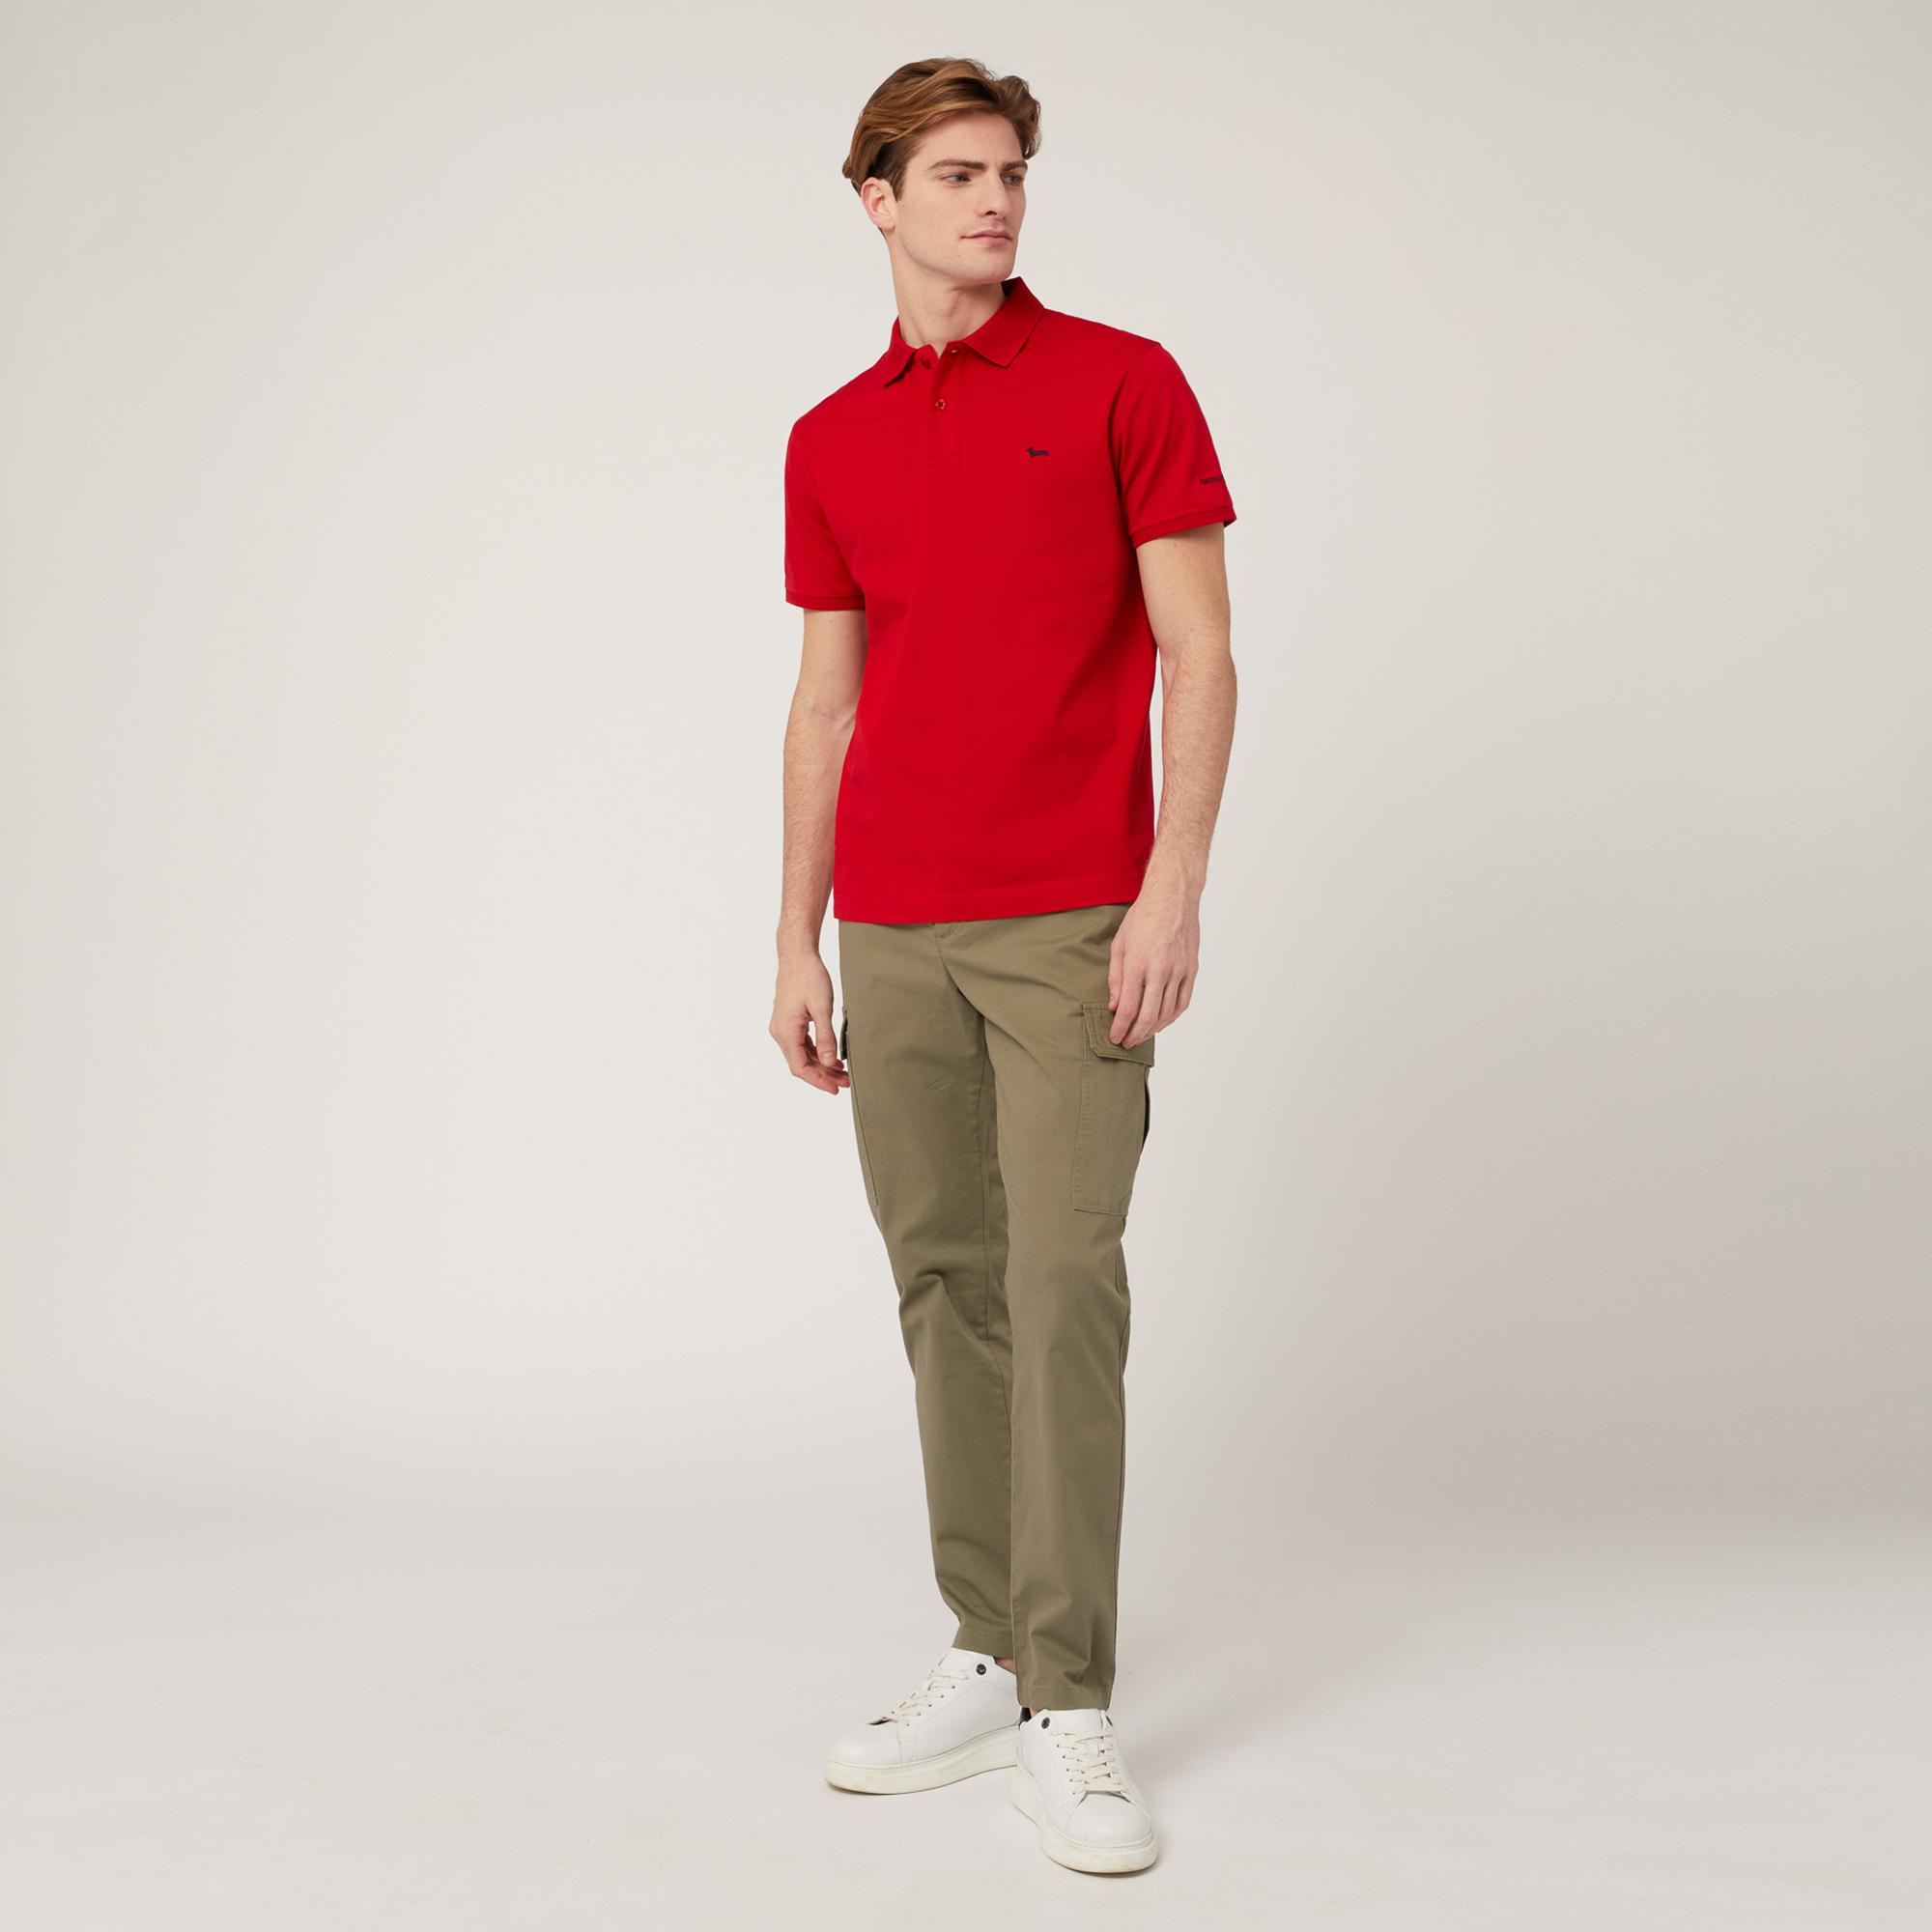 Poloshirt mit Lettering und Logo, Rot, large image number 3